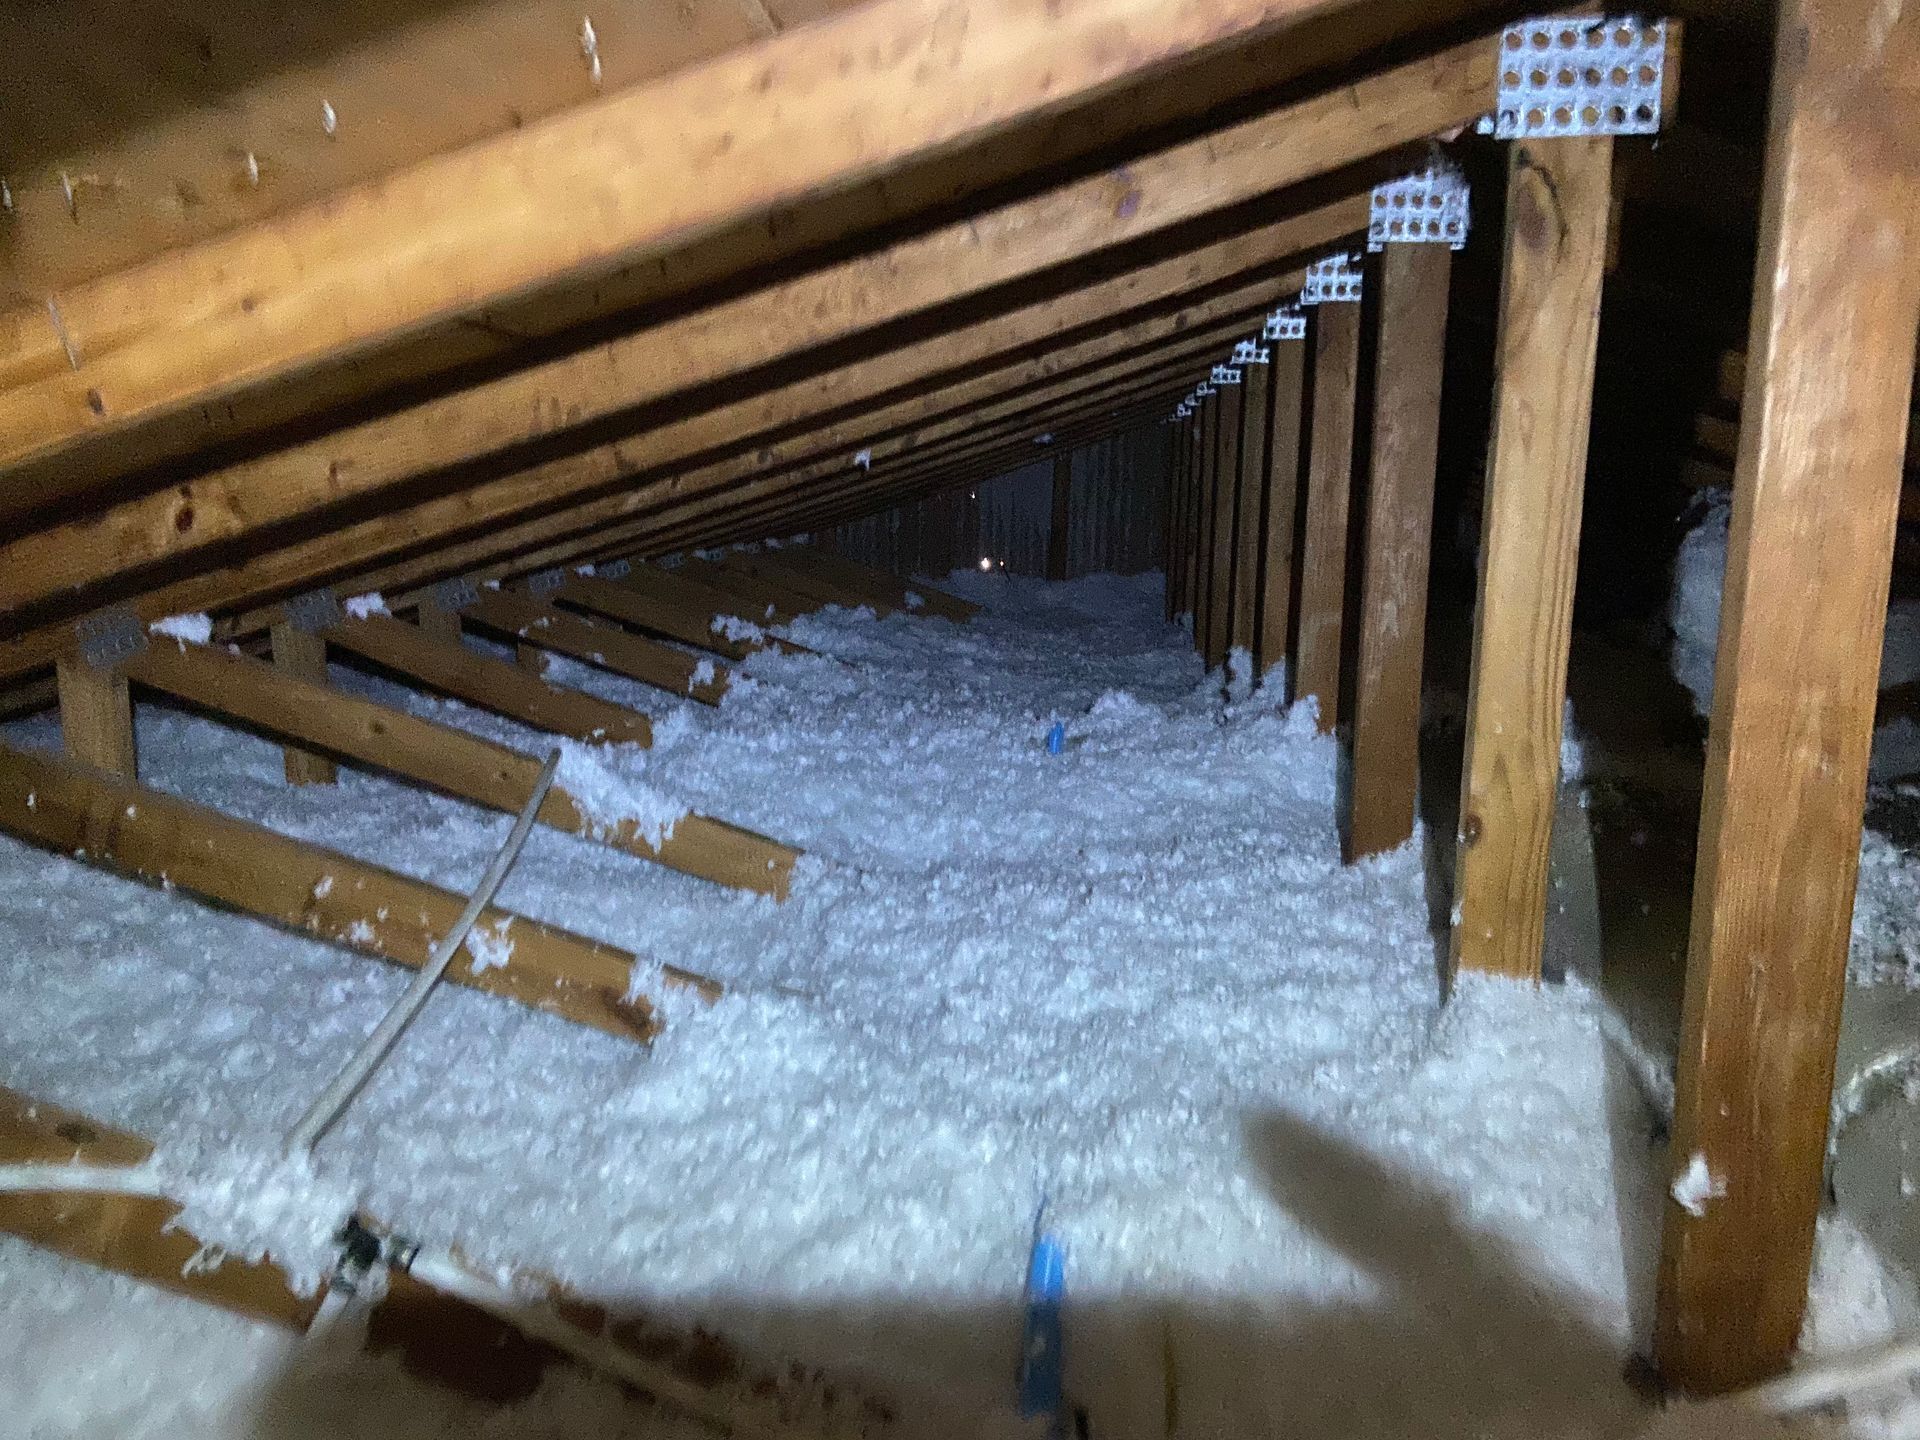 There is a lot of insulation in the attic of a house.